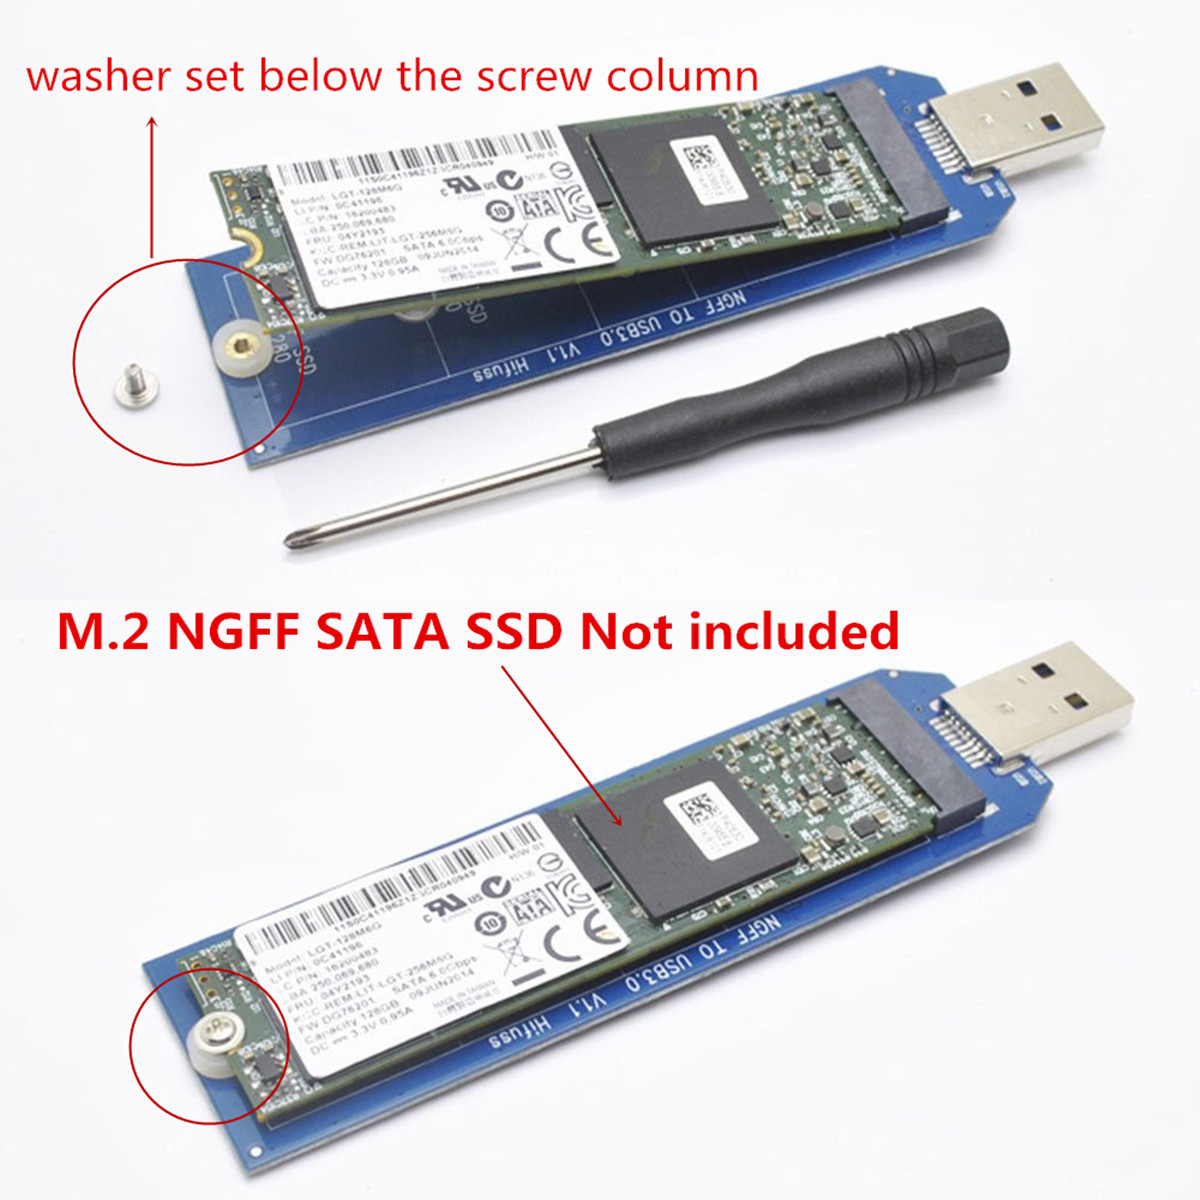 M.2 NGFF SSD SATA to USB 3.0 Converter Adapter External Enclosure Mobile SSD Case 71